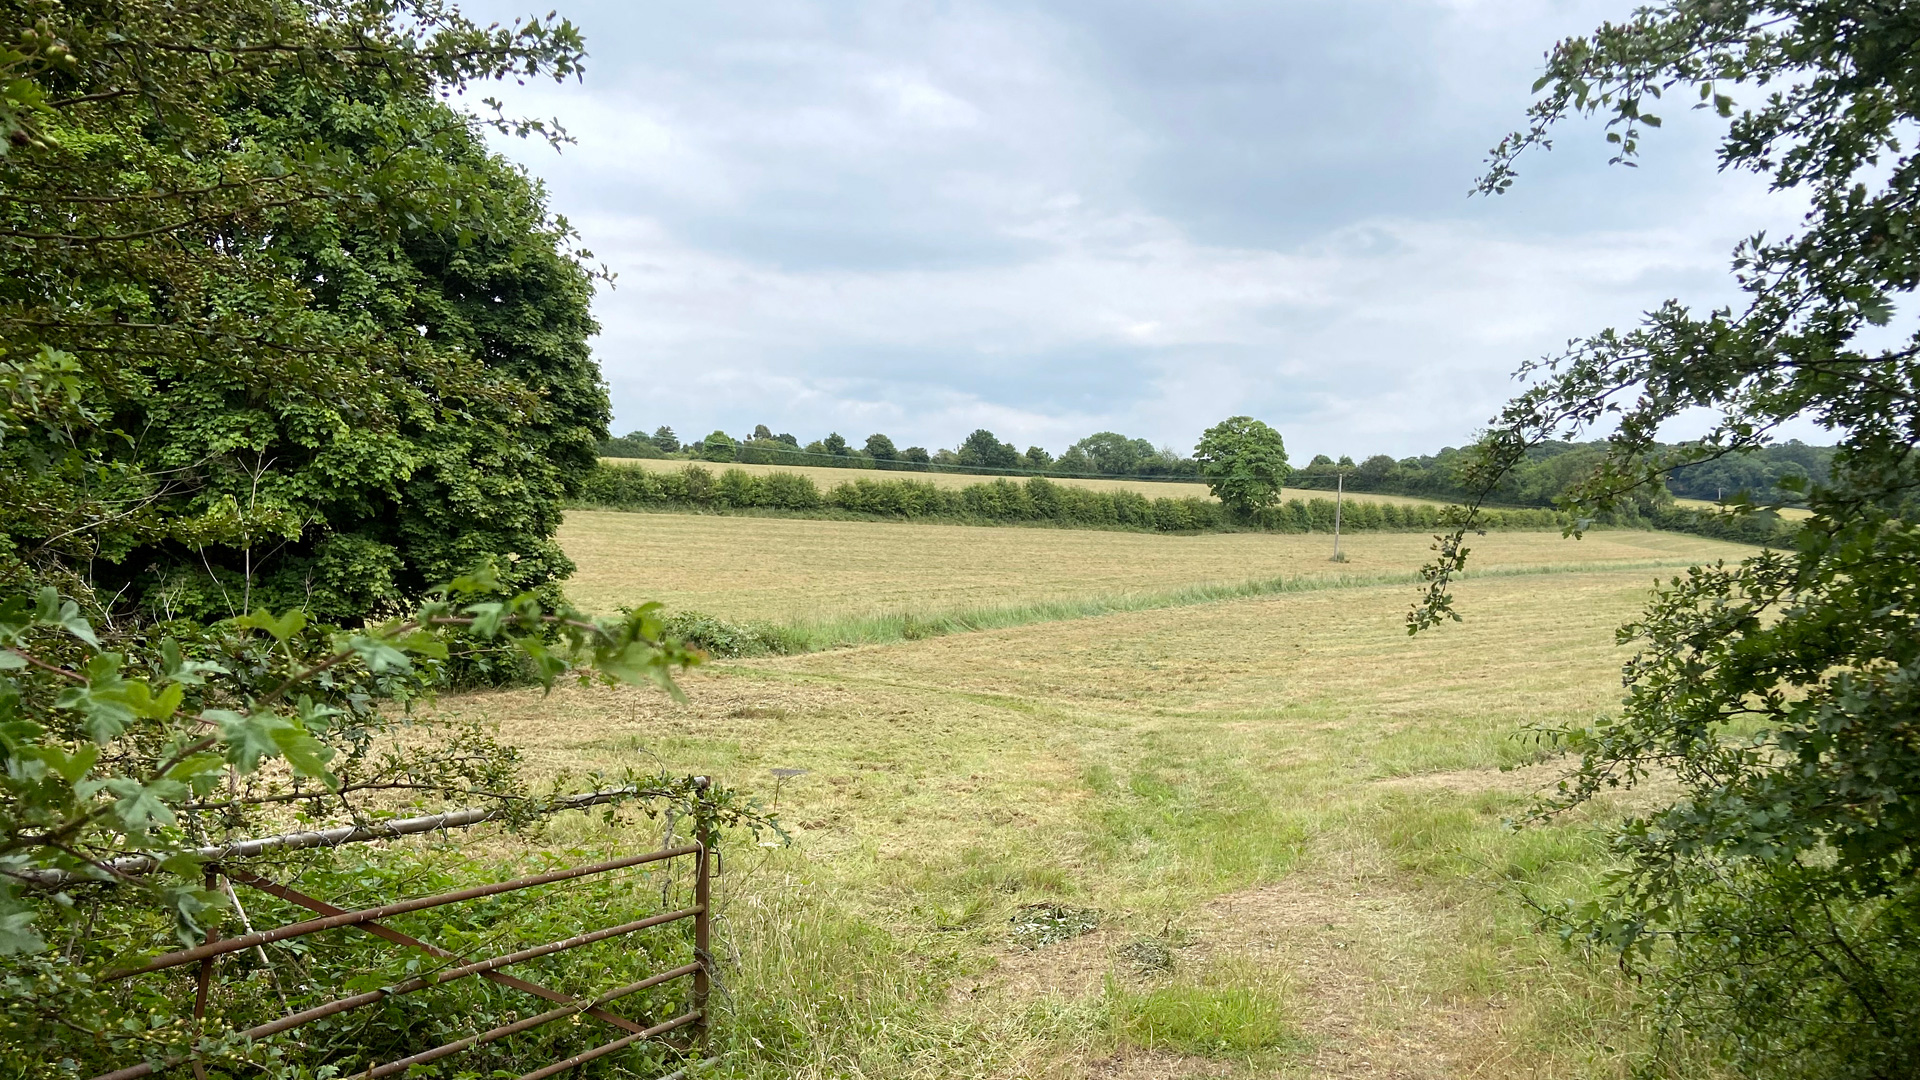 Land for sale near Slip End access